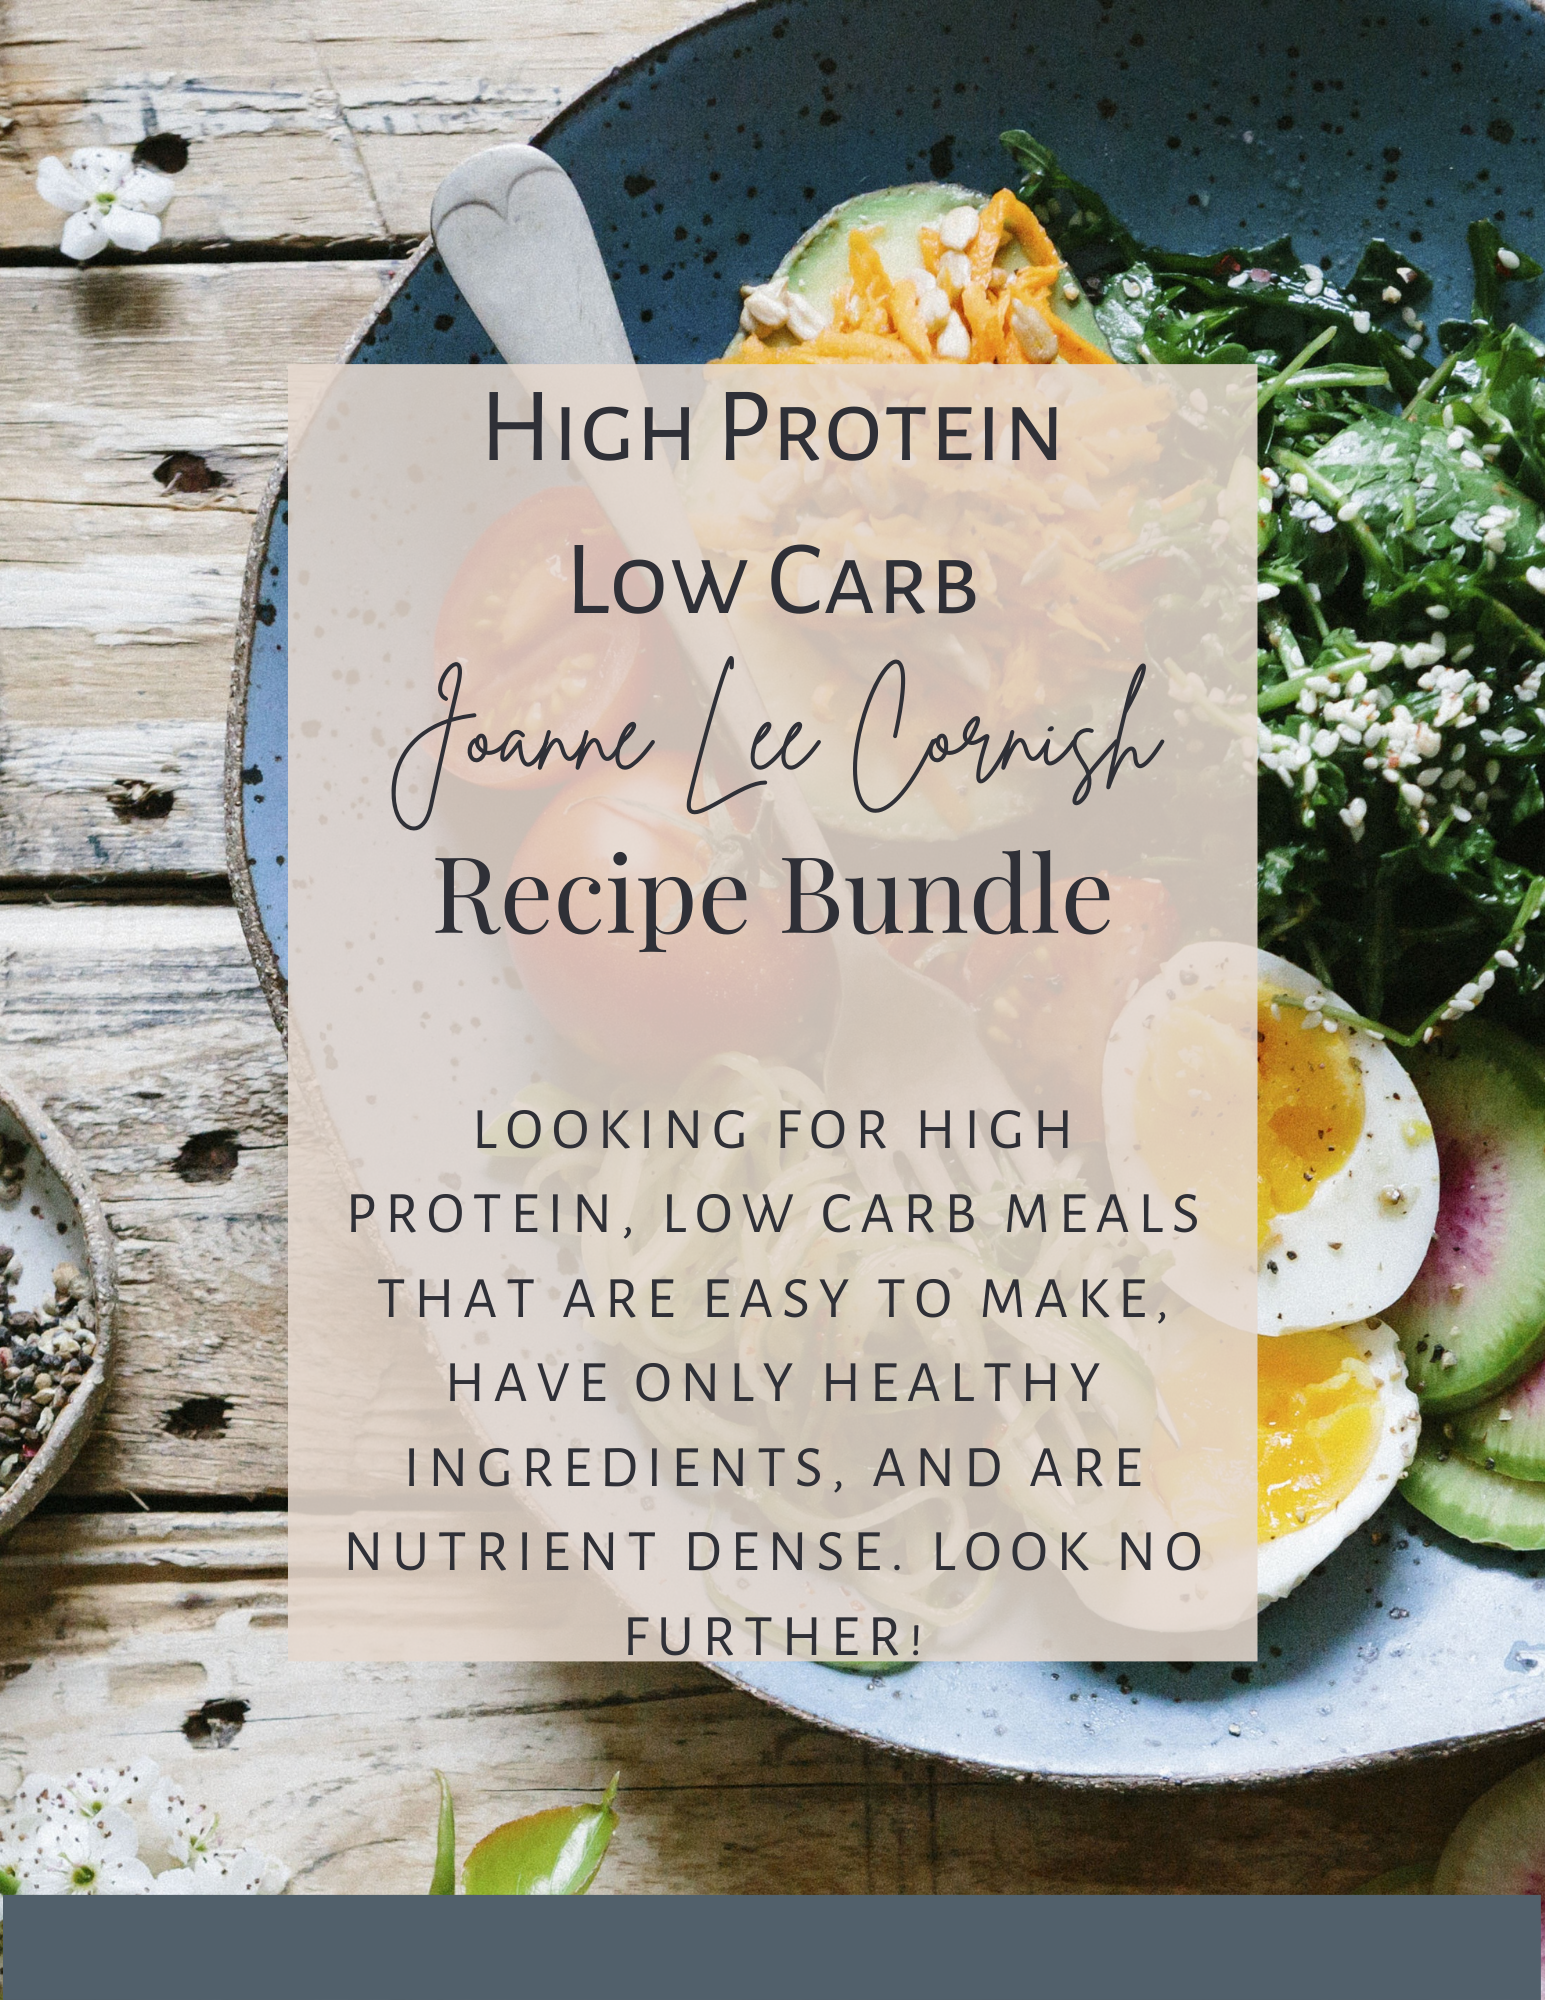 HIGH PROTEIN LOW CARB MEAL PLAN